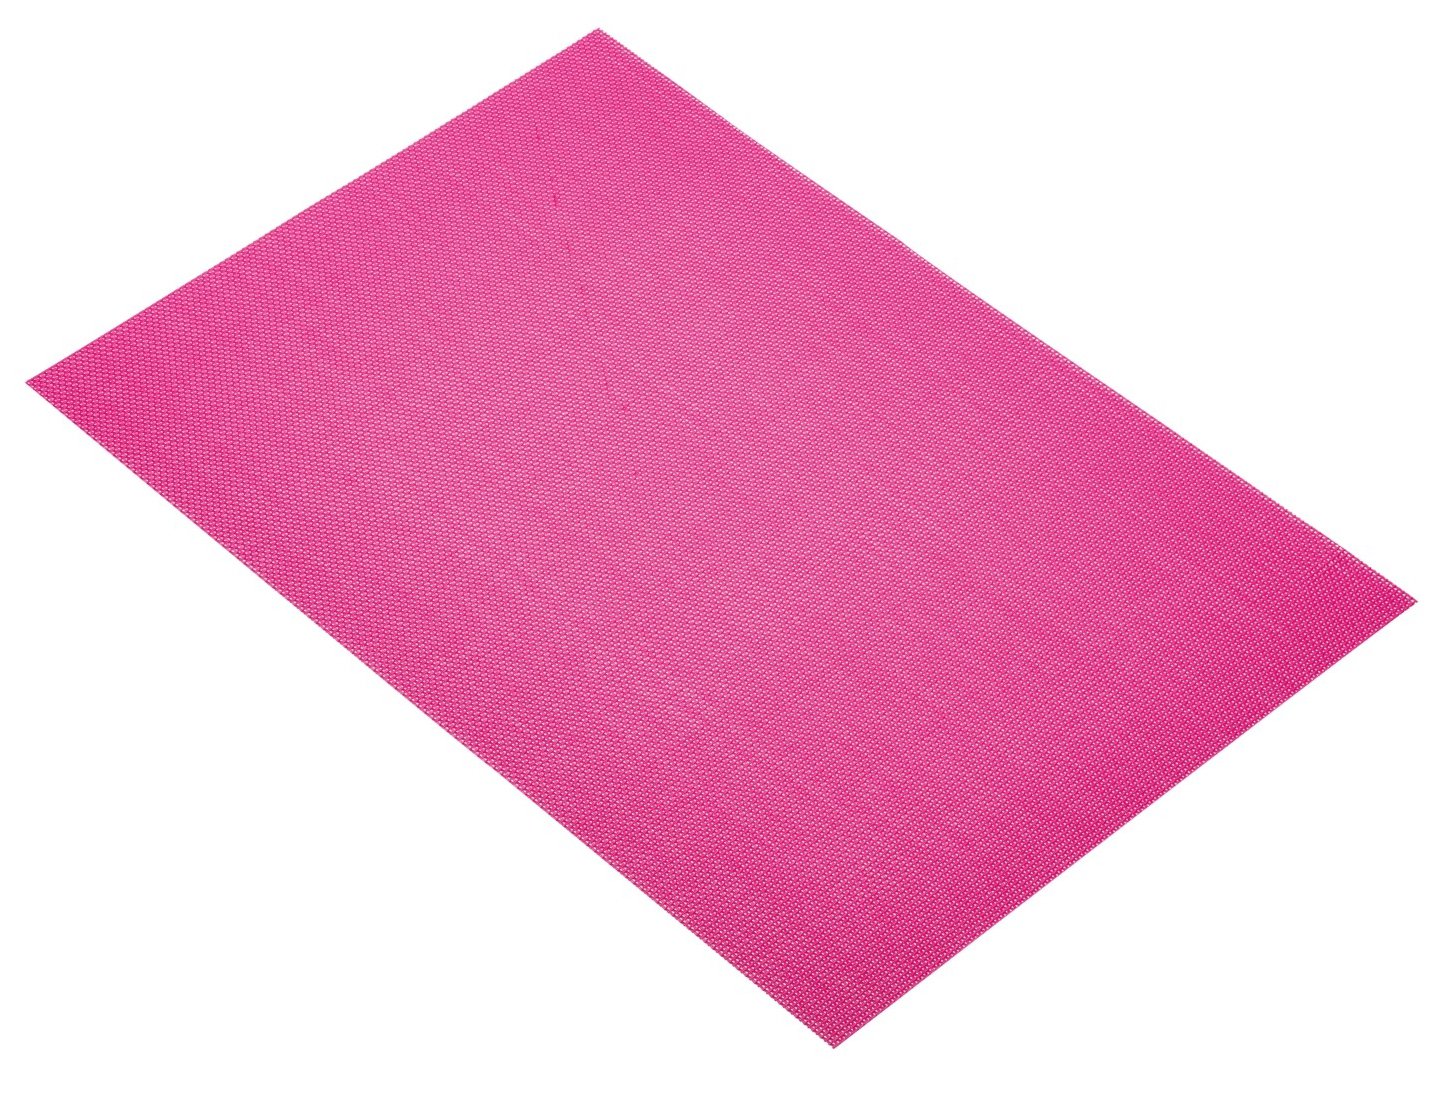 KitchenCraft Woven Pink Placemat 30cm x 45cm at Barnitts Online Store ...